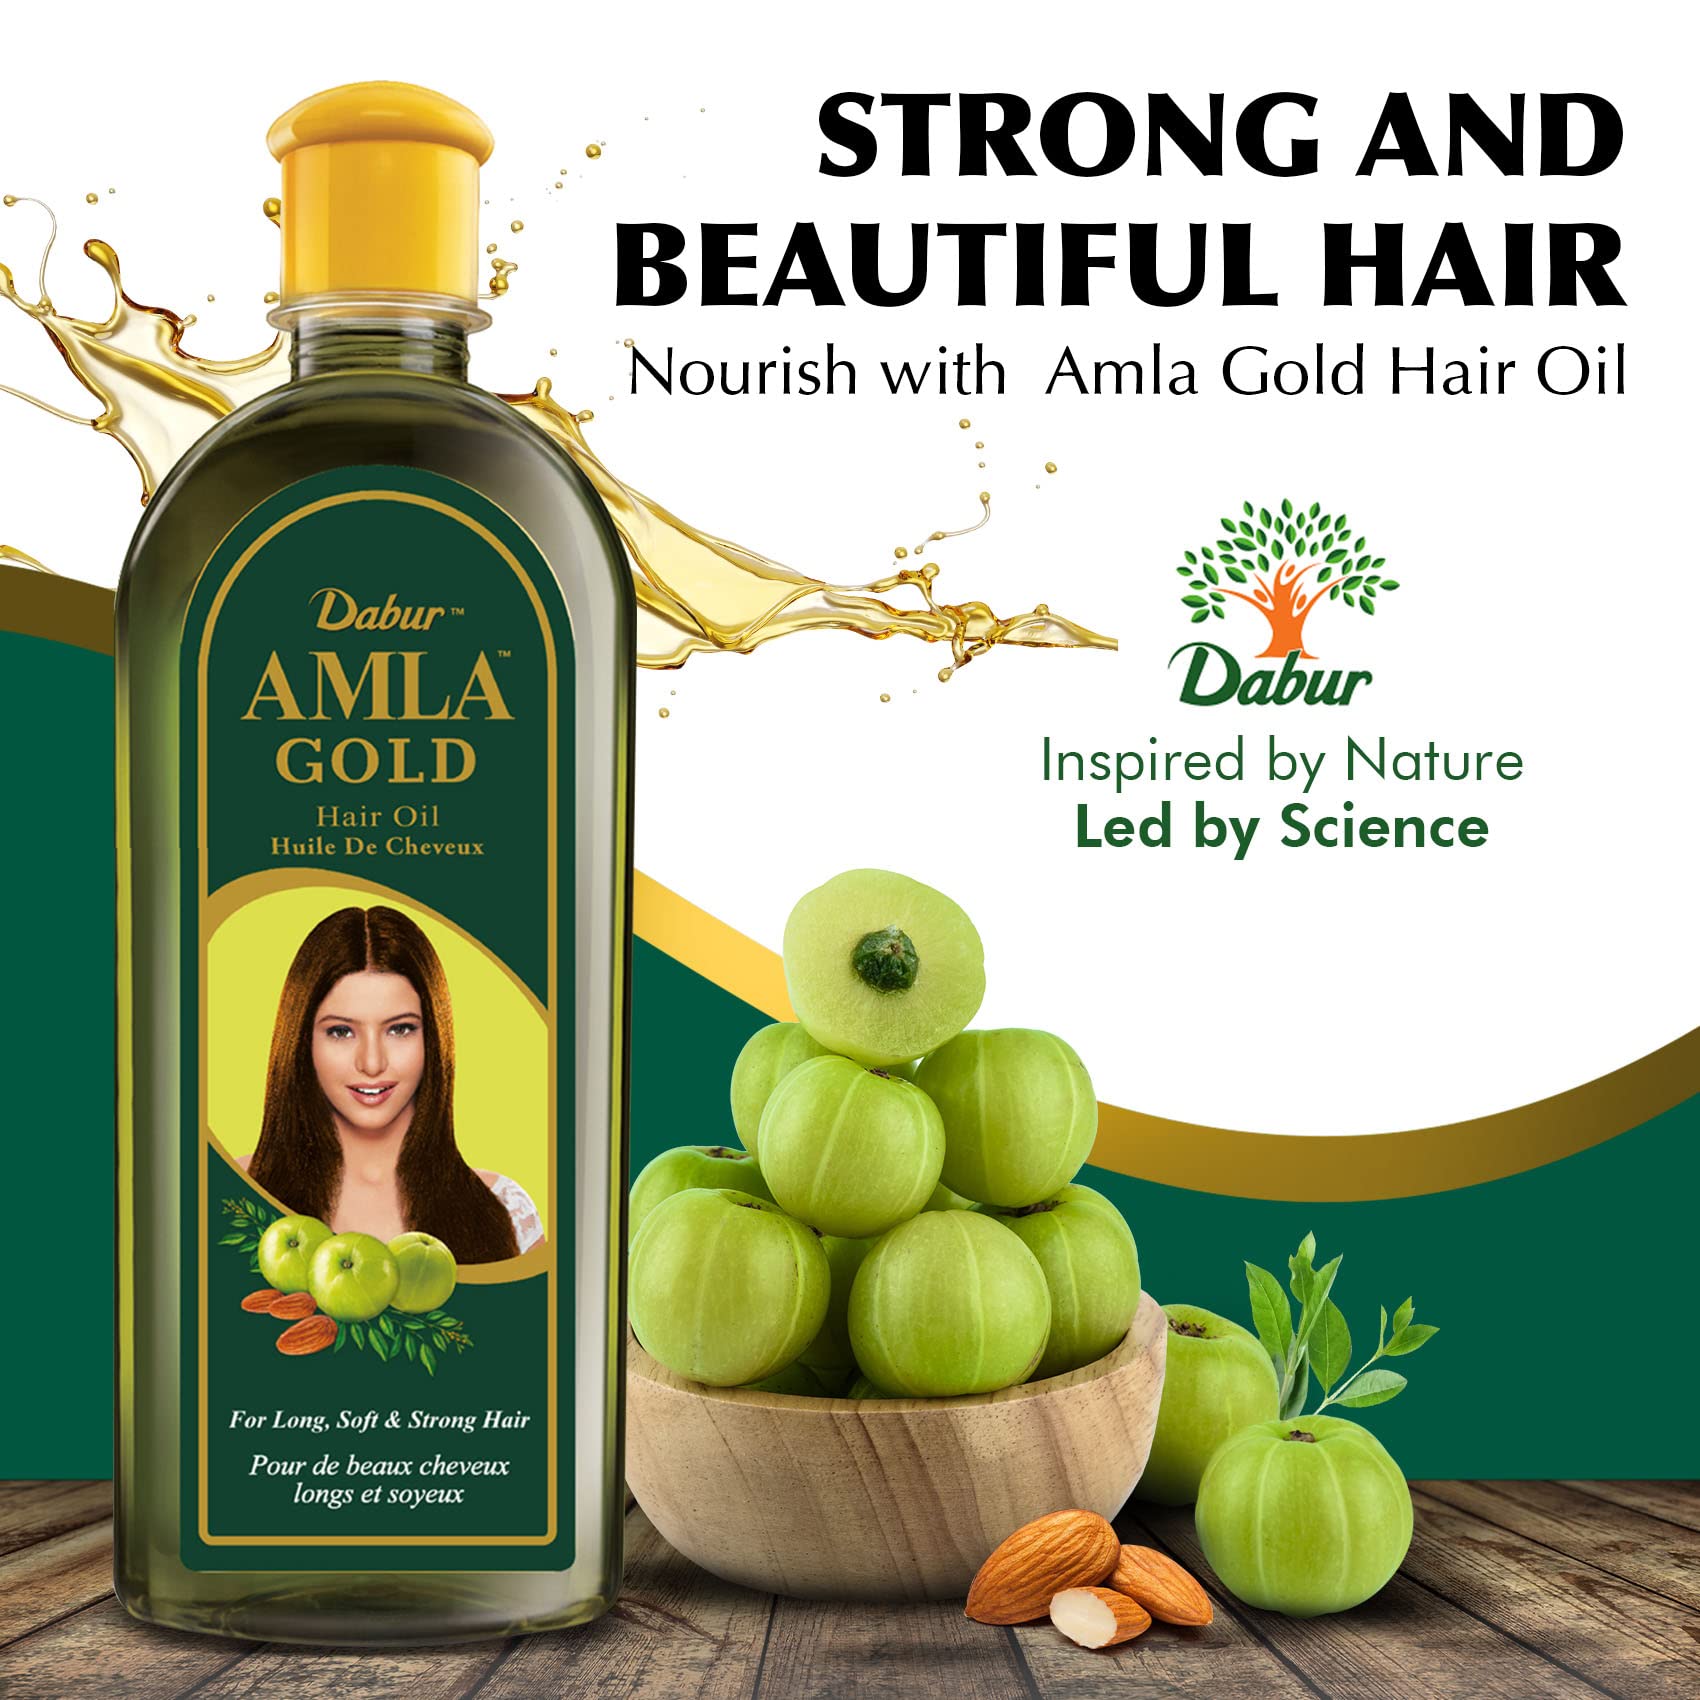 Dabur Amla Gold Hair Oil - Hair Serum with Amla Oil, Almond and Henna - Moisturizing Hair and Scalp Oil for All Types of Hair - Natural Hair Oil Treatment Products for Women - 10.14 Fl Oz (Pack of 1)